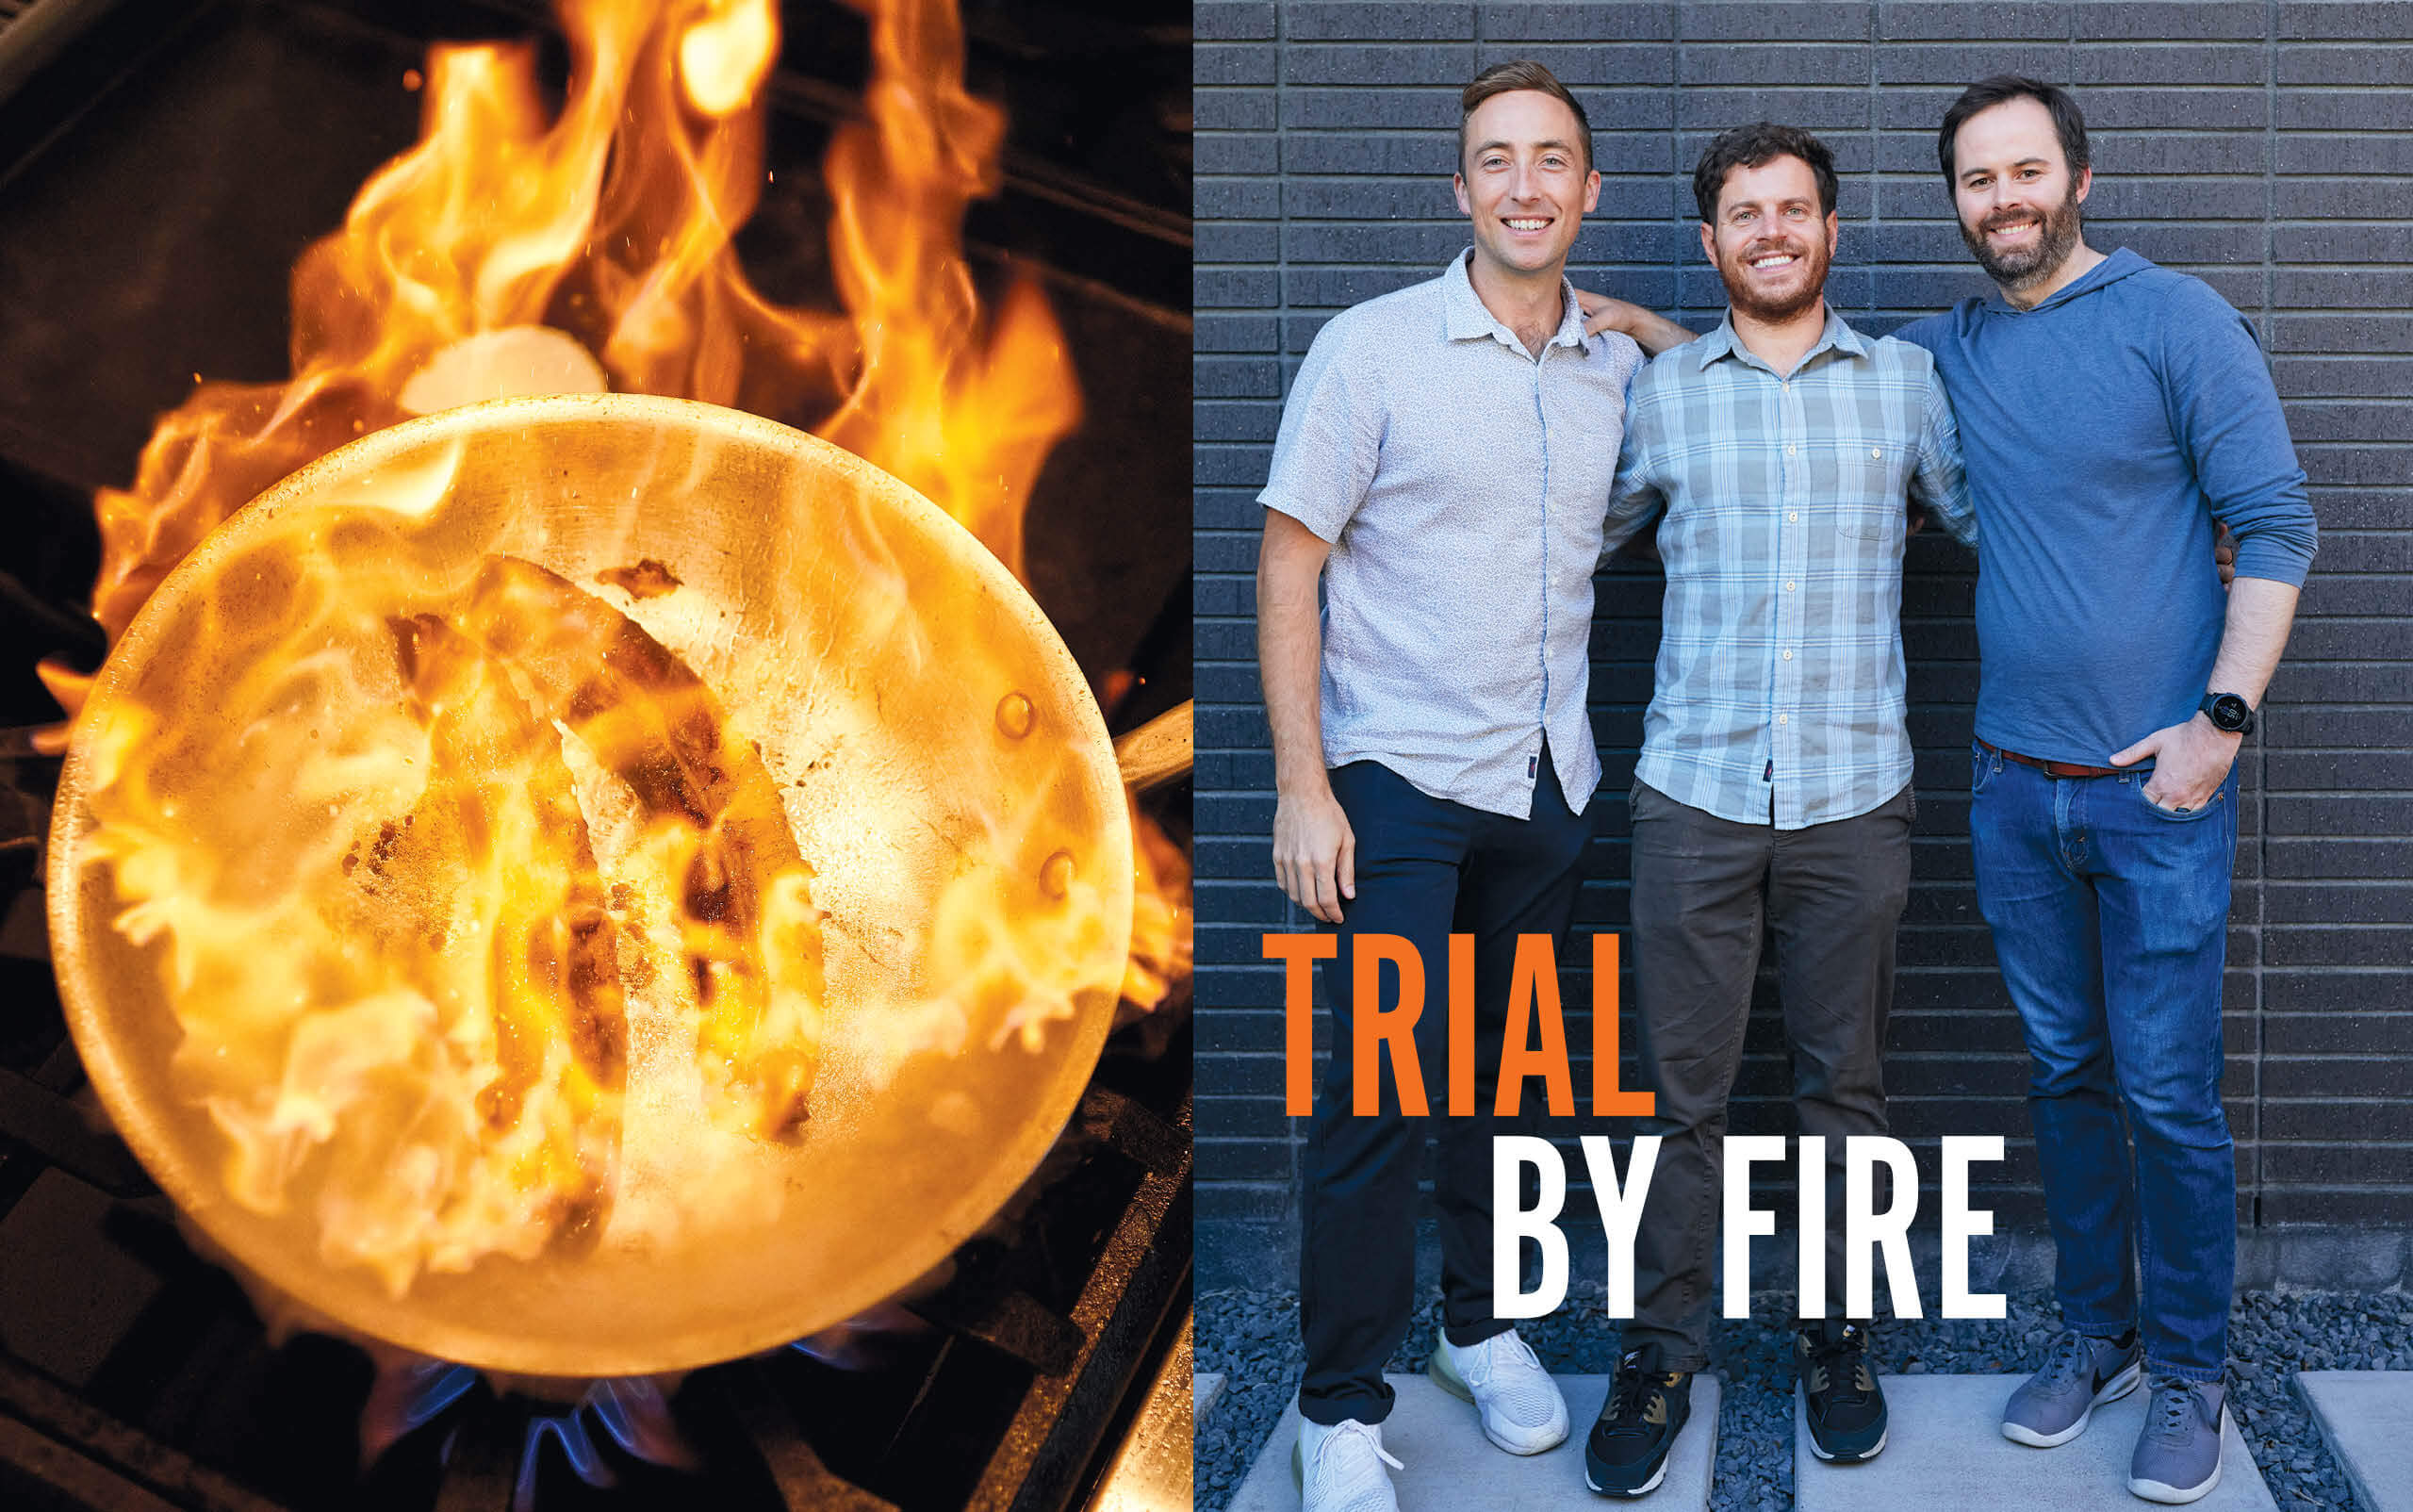 On the left is a Made In frying pan with two strips of bacon engulfed in flames. On the right, Chad Brinton, Chip Malt, and Matt Gunderson, all MBA 15, stand in front of a blue brick wall.